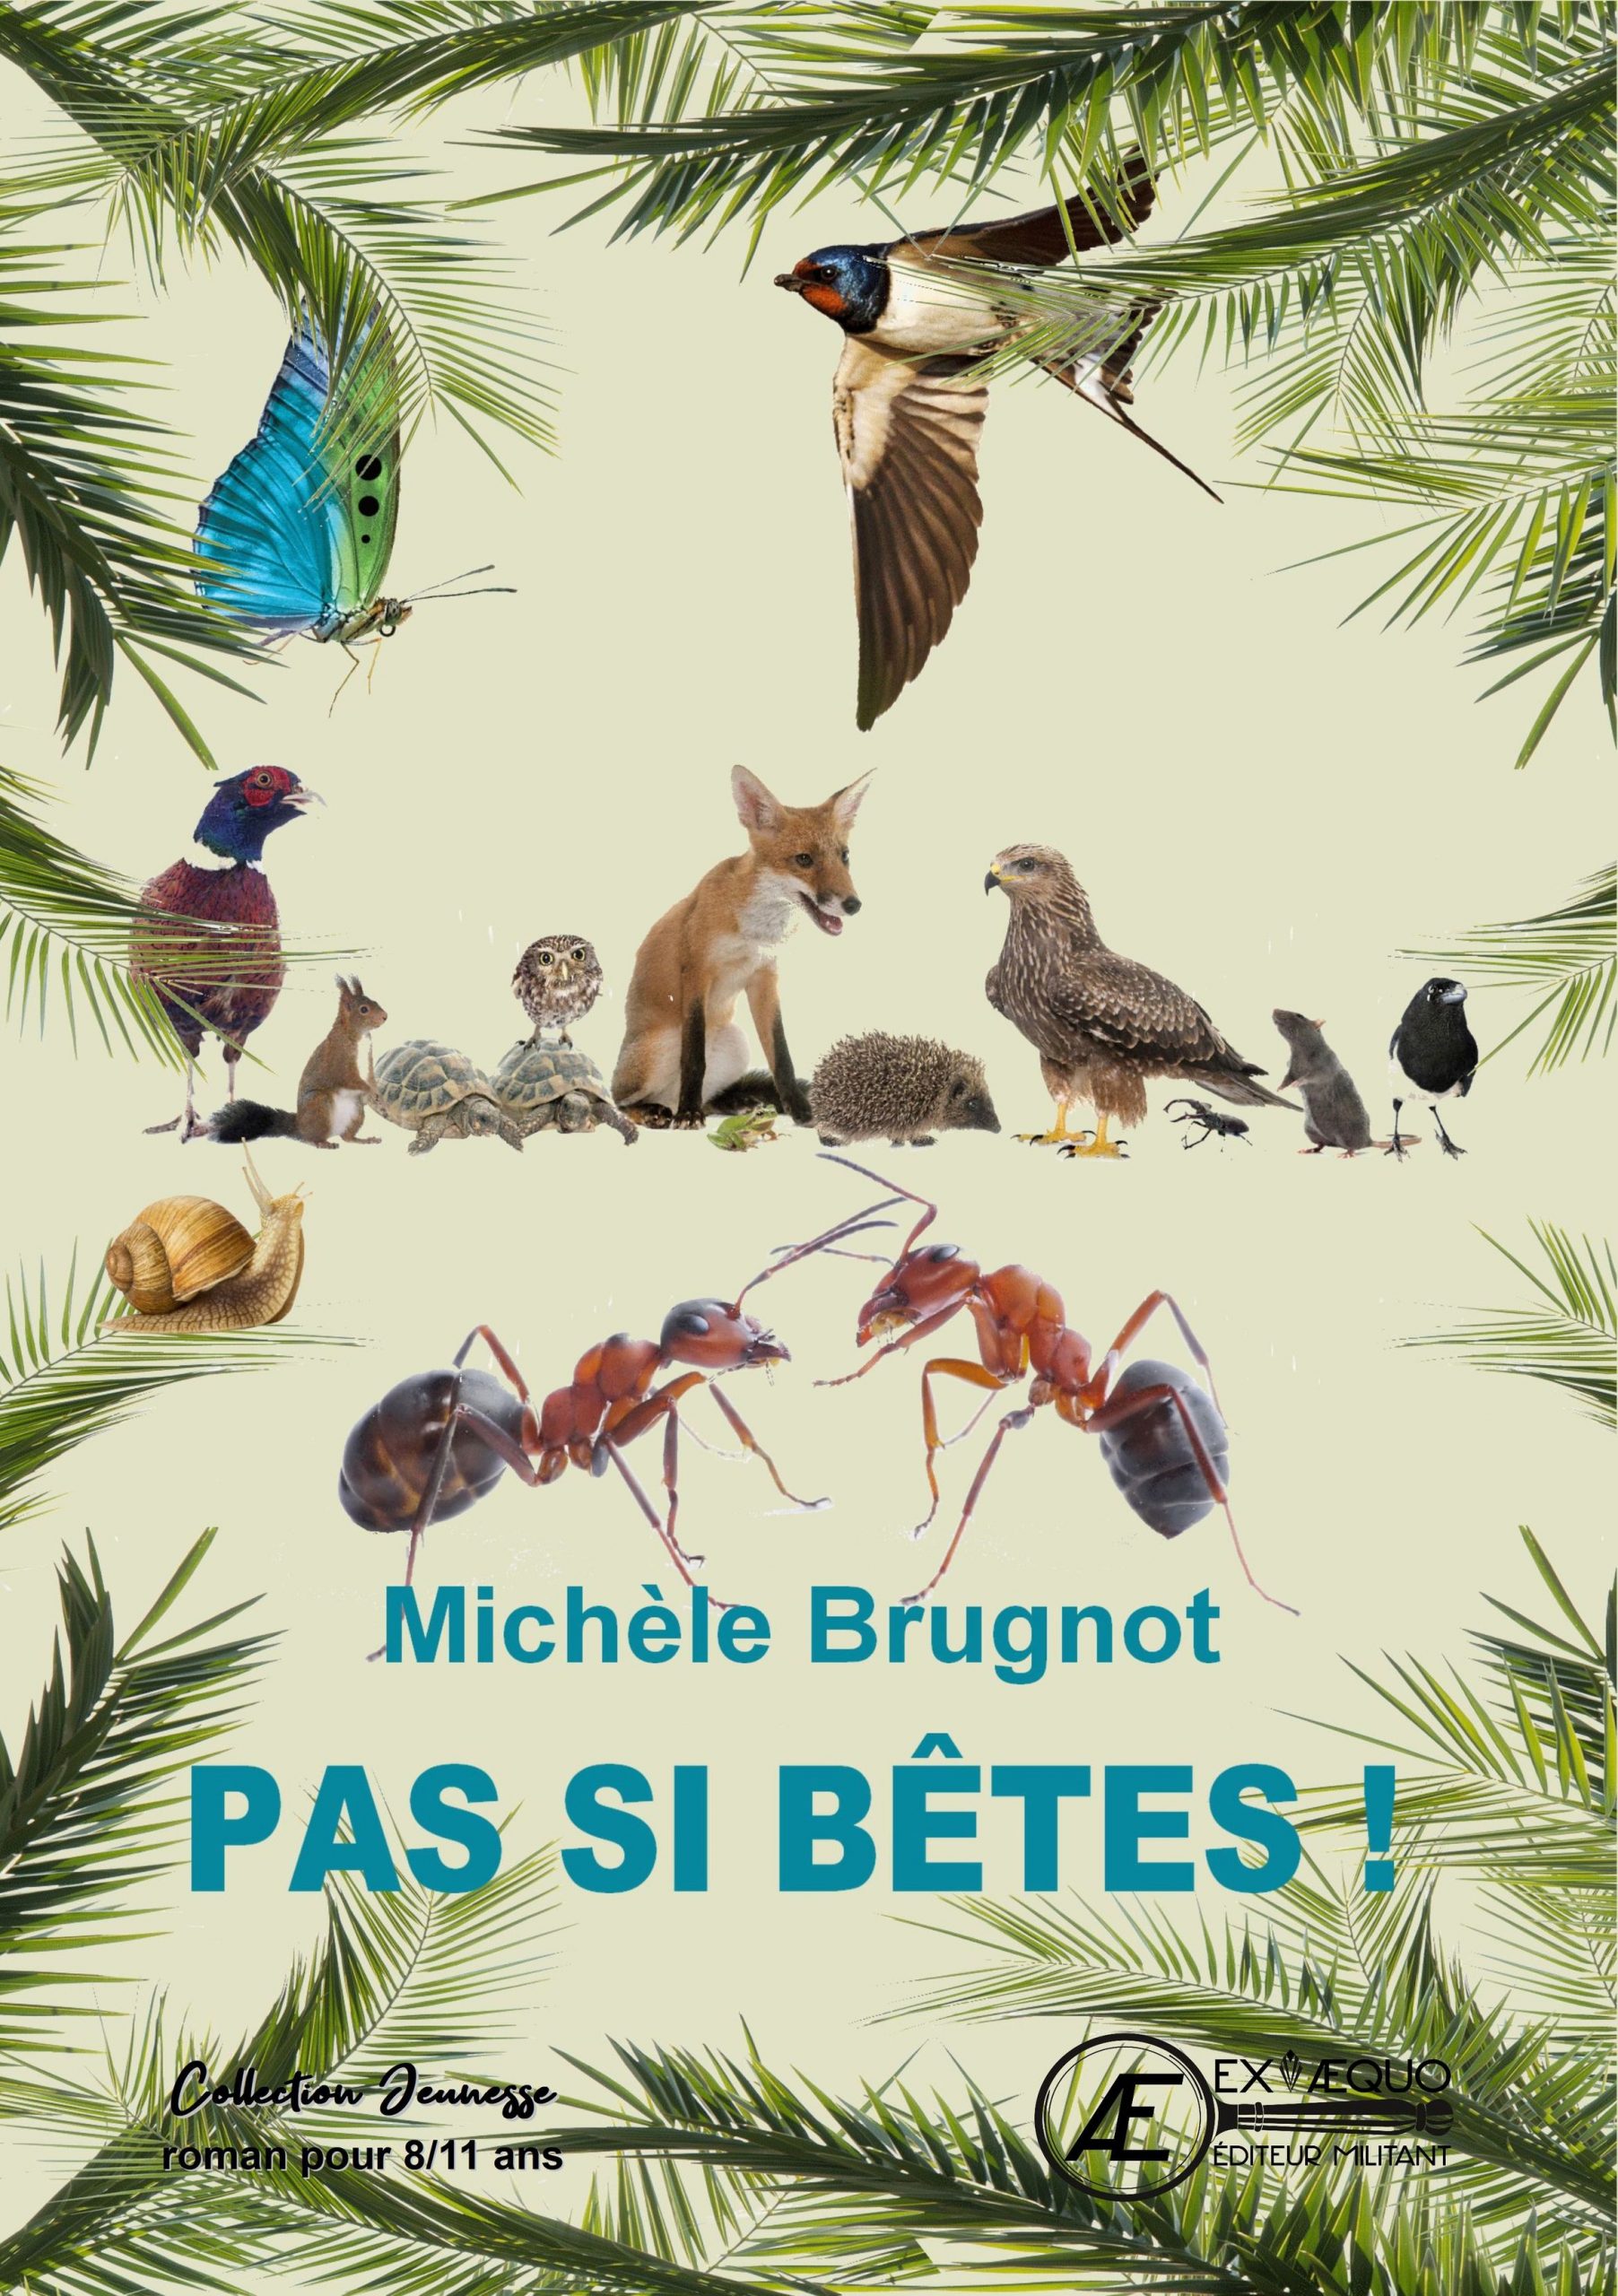 You are currently viewing Pas si bêtes !, de Michèle Brugnot